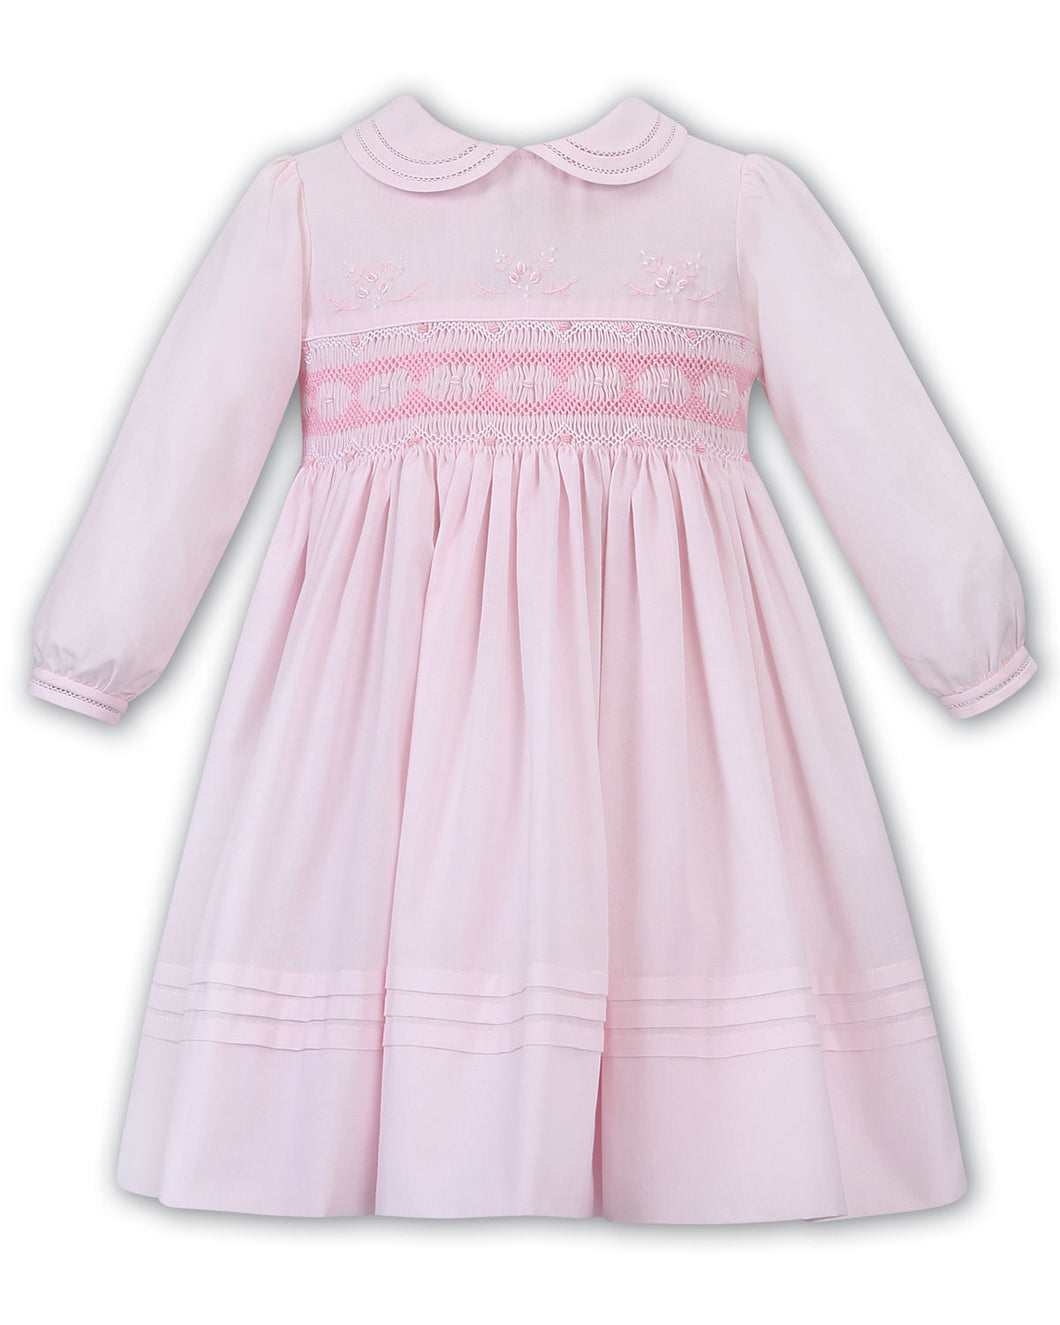 Girls Long Sleeved Traditional Hand Smocked Dress Embroidered Applique Detail to Bodice, Hemline and Sleeves. Peter Pan Collar